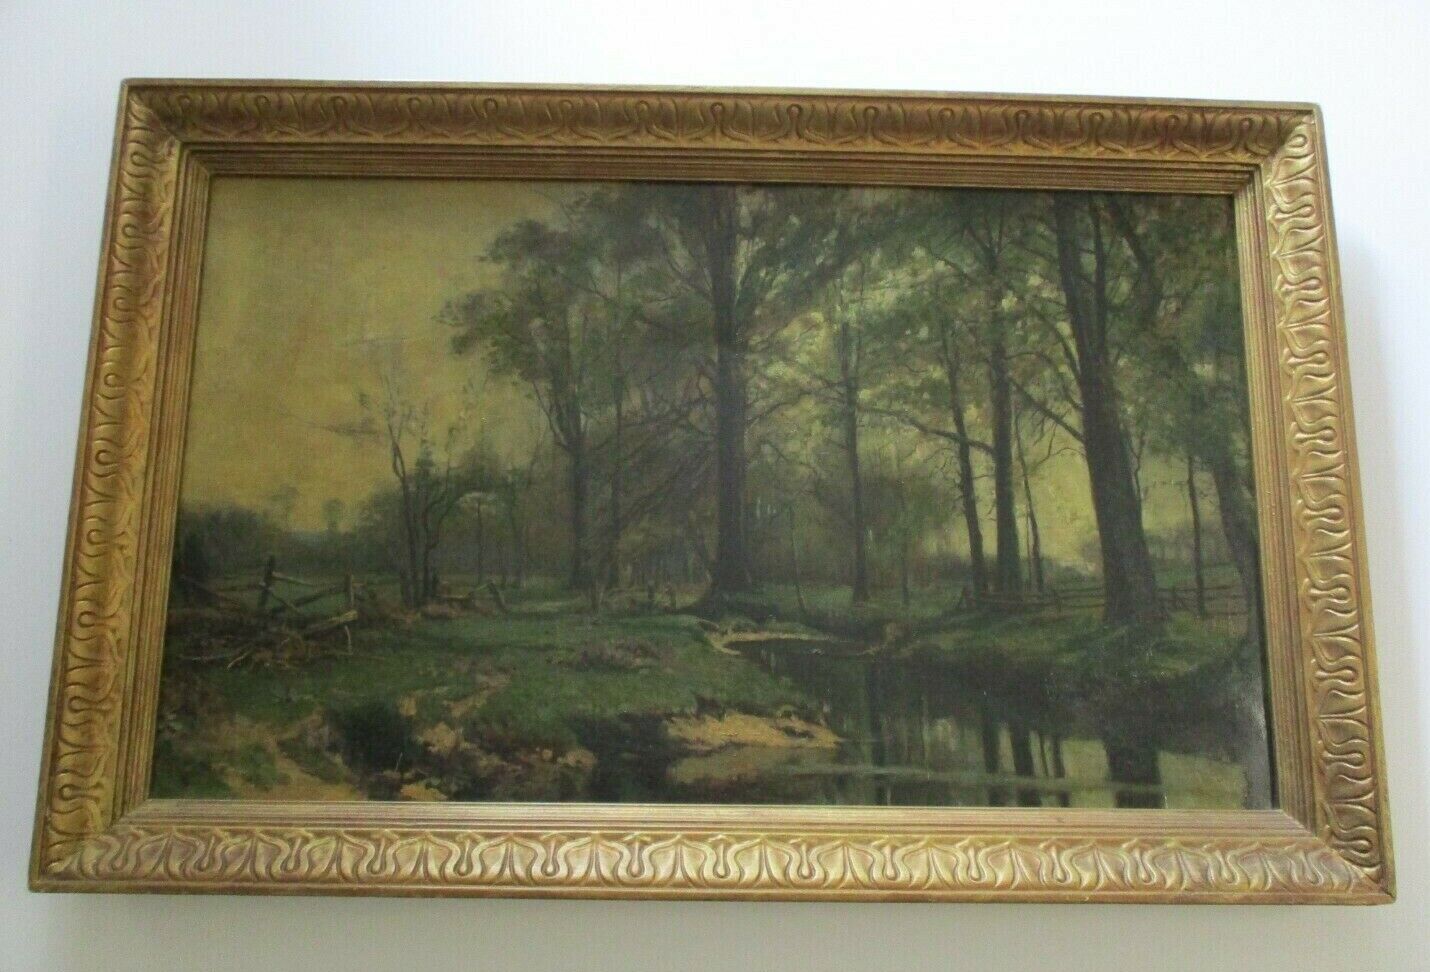 LARGE ANTIQUE 19TH - 20TH CENTURY MASTERFUL LANDSCAPE PAINTING IMPRESSIONIST OLD